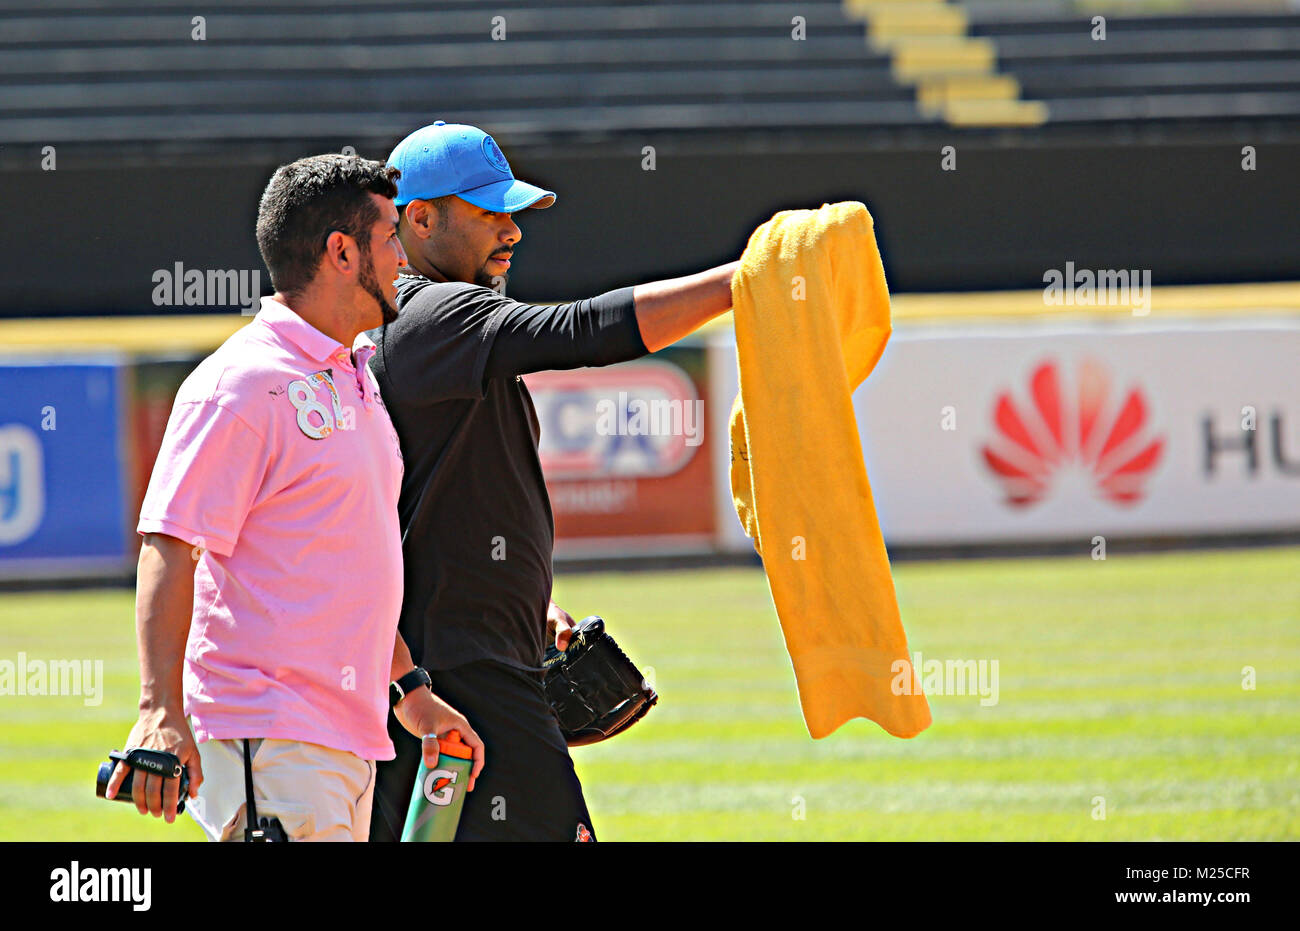 Valencia, Carabobo, Venezuela. 8th Jan, 2015. January 08, 2015. ÃŠ Johan Santana (R), Venezuelan pitcher of the big leagues, resumes his training, in order to fight for a place for the season of the year in the big leagues. The photo was taken during a ''game simulation'' at the JosÅ½ Bernardo PÅ½rez stadium in the city of Valencia, Carabobo state. Venezuela on January 8, 2015. Photo: Juan Carlos Hern''¡ndez. Credit: Juan Carlos Hernandez/ZUMA Wire/Alamy Live News Stock Photo